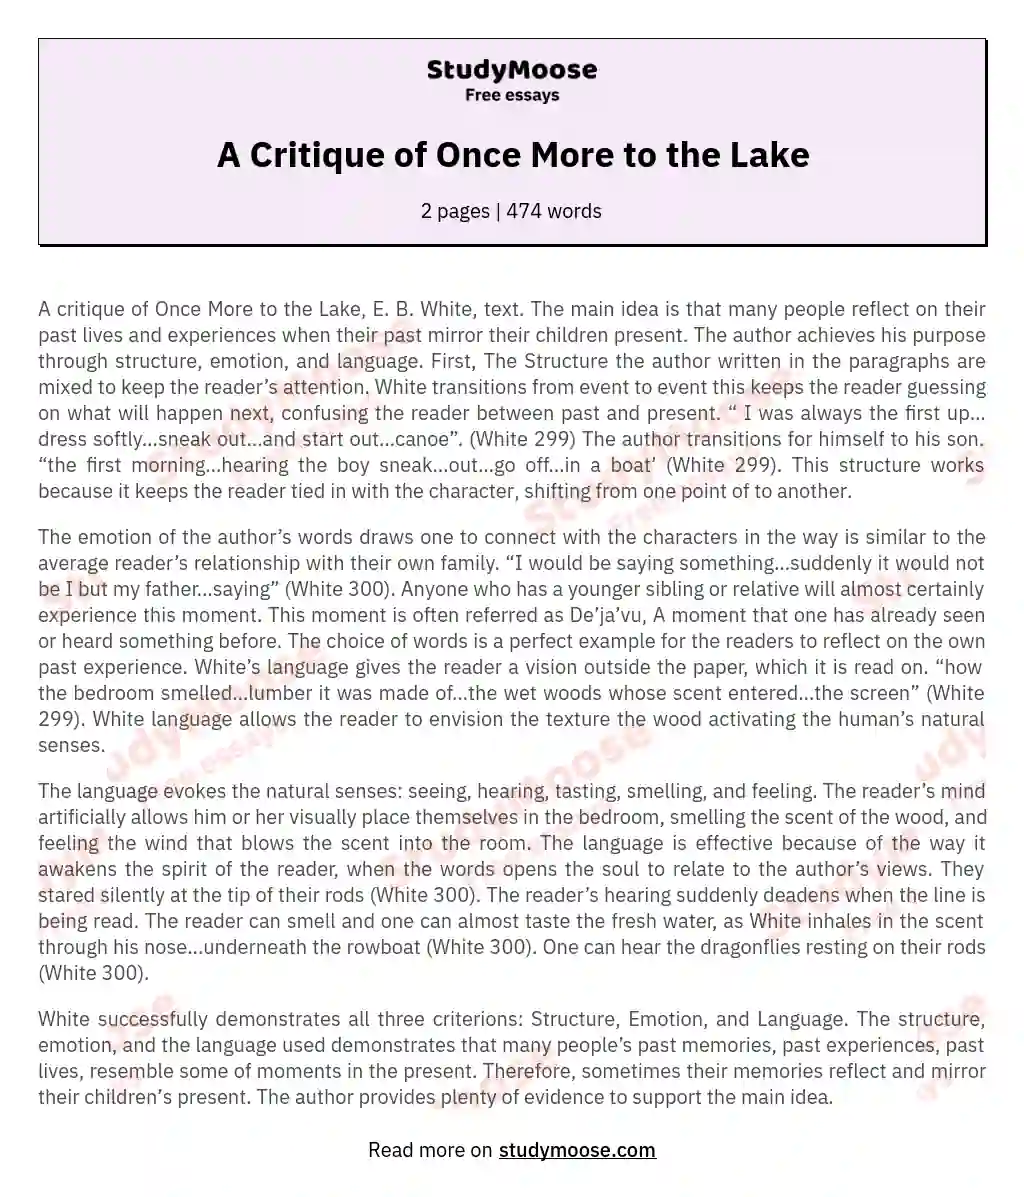 A Critique of Once More to the Lake essay